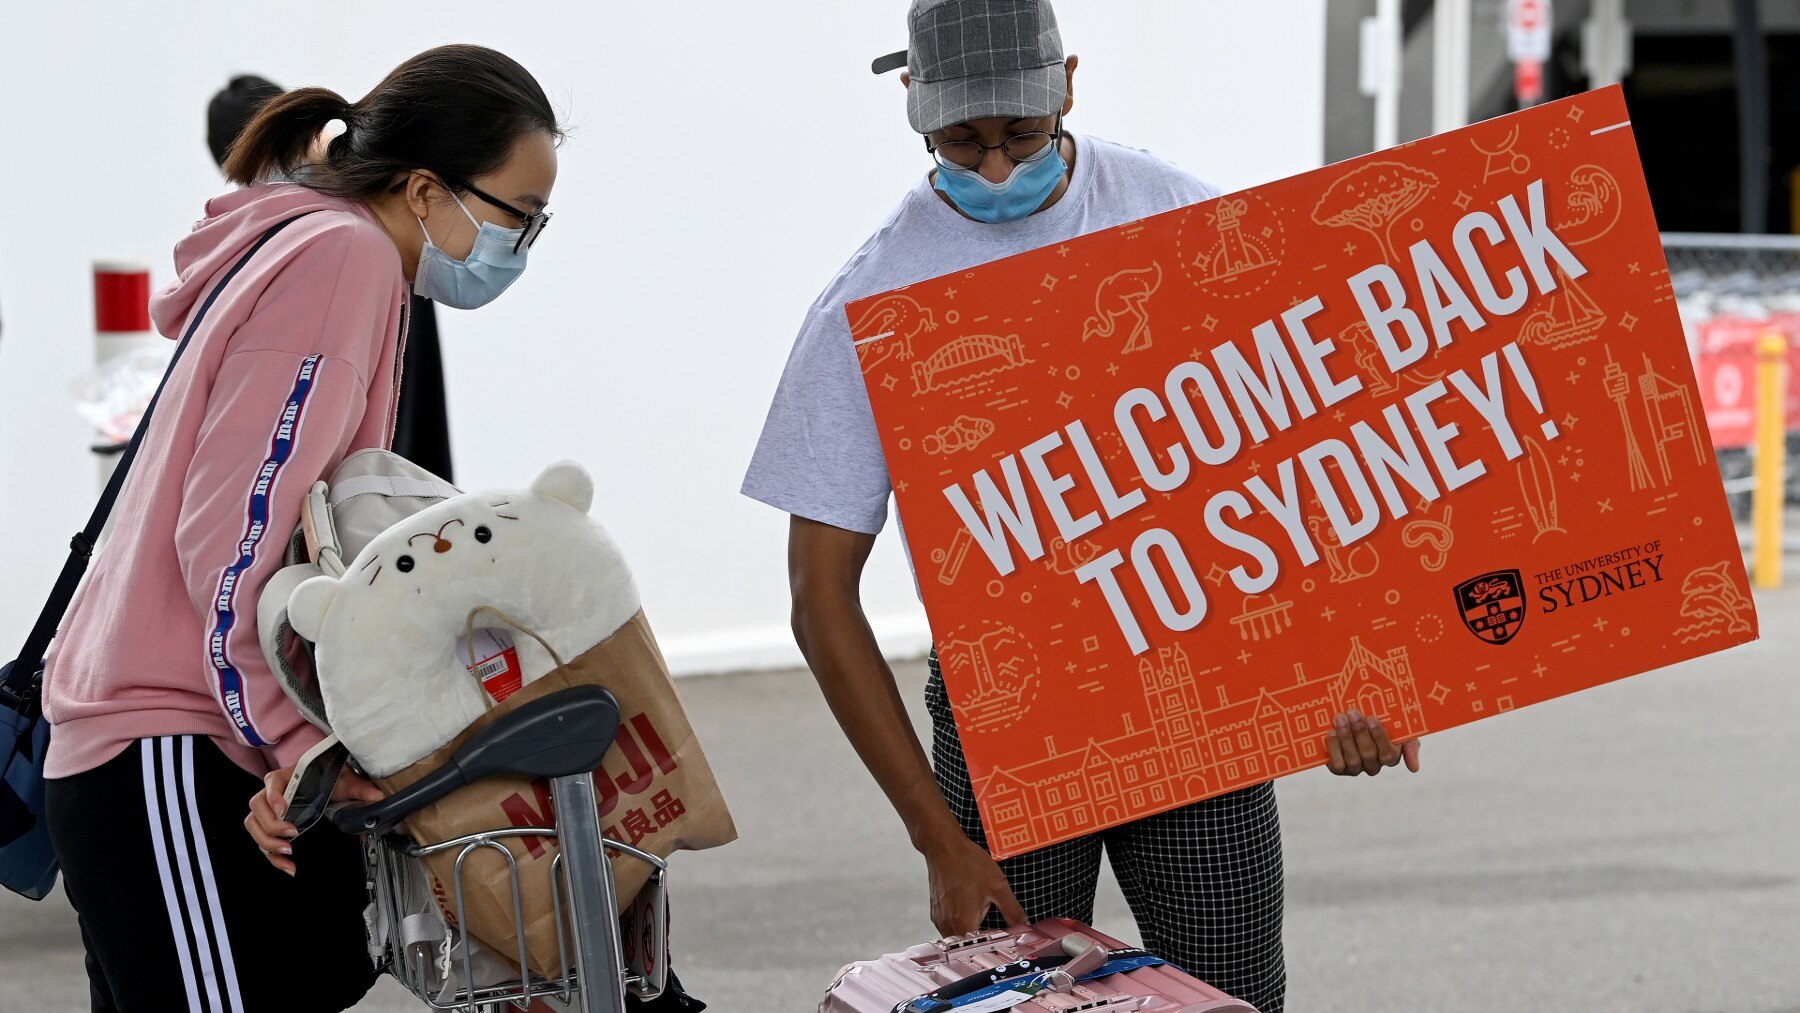 University representatives hold signs as international students arrive at Sydney Airport in Sydney.